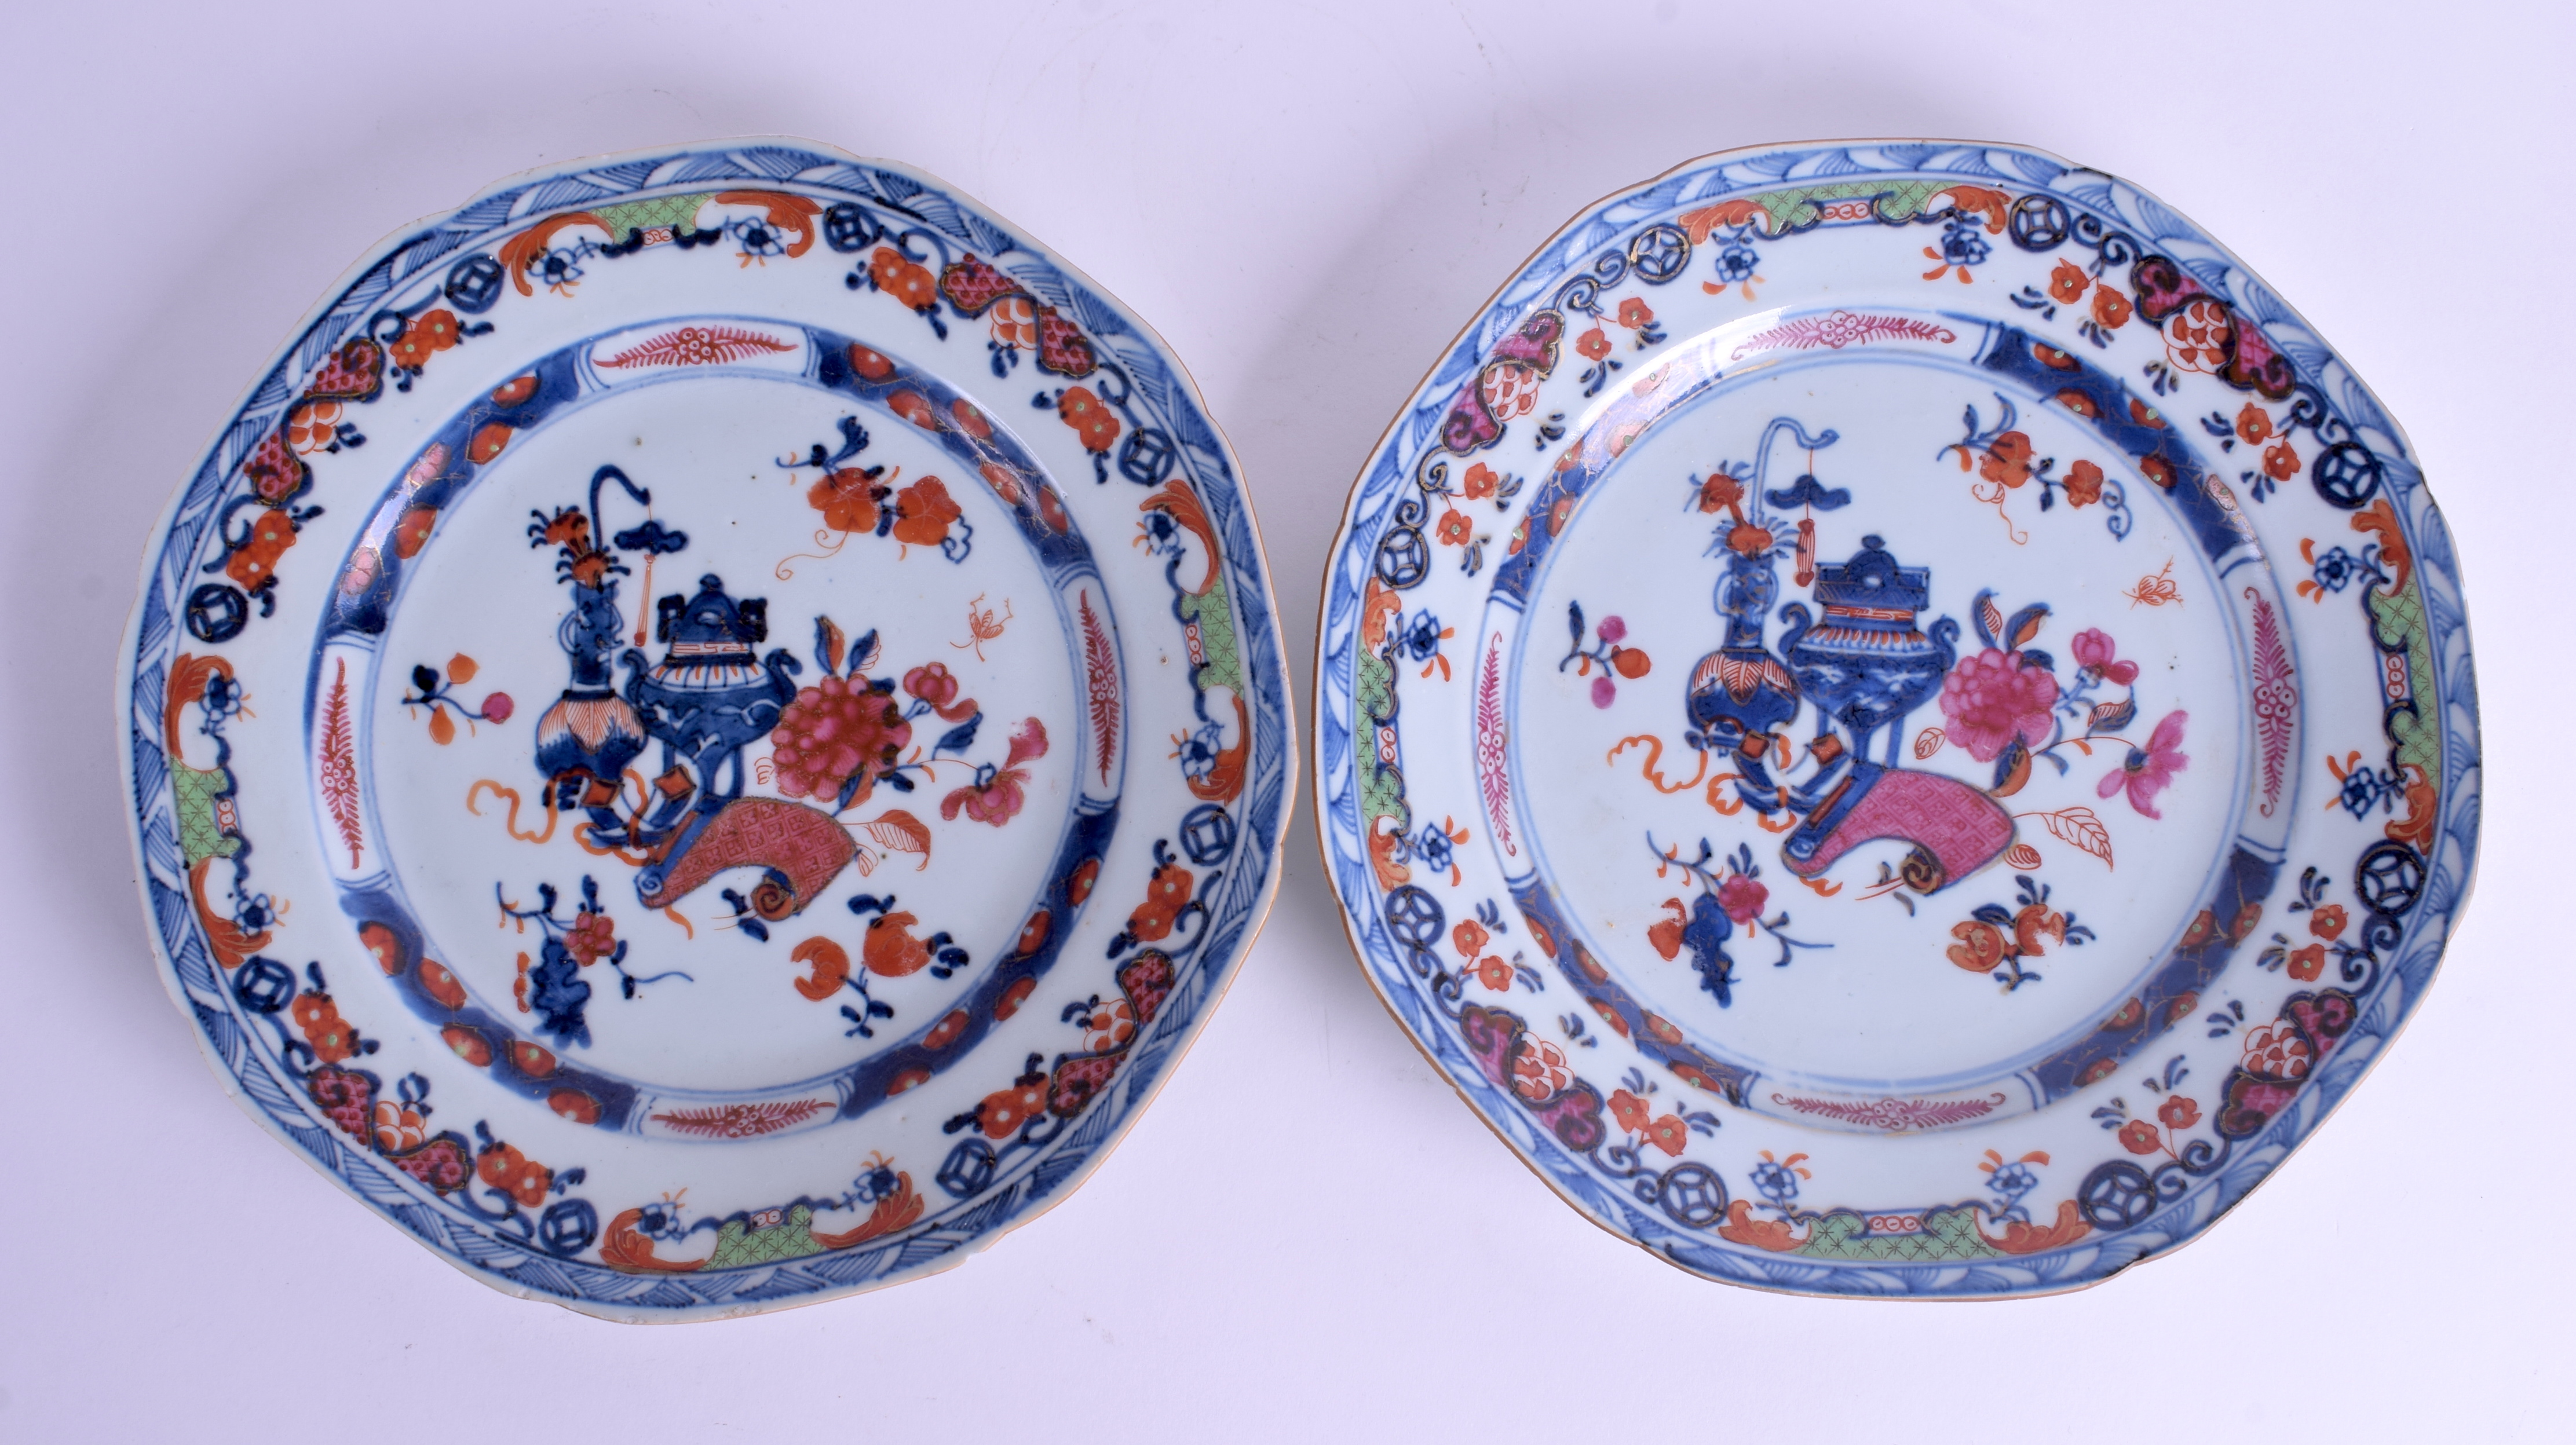 A PAIR OF 18TH CENTURY CHINESE EXPORT PLATES Qianlong. 23 cm wide.